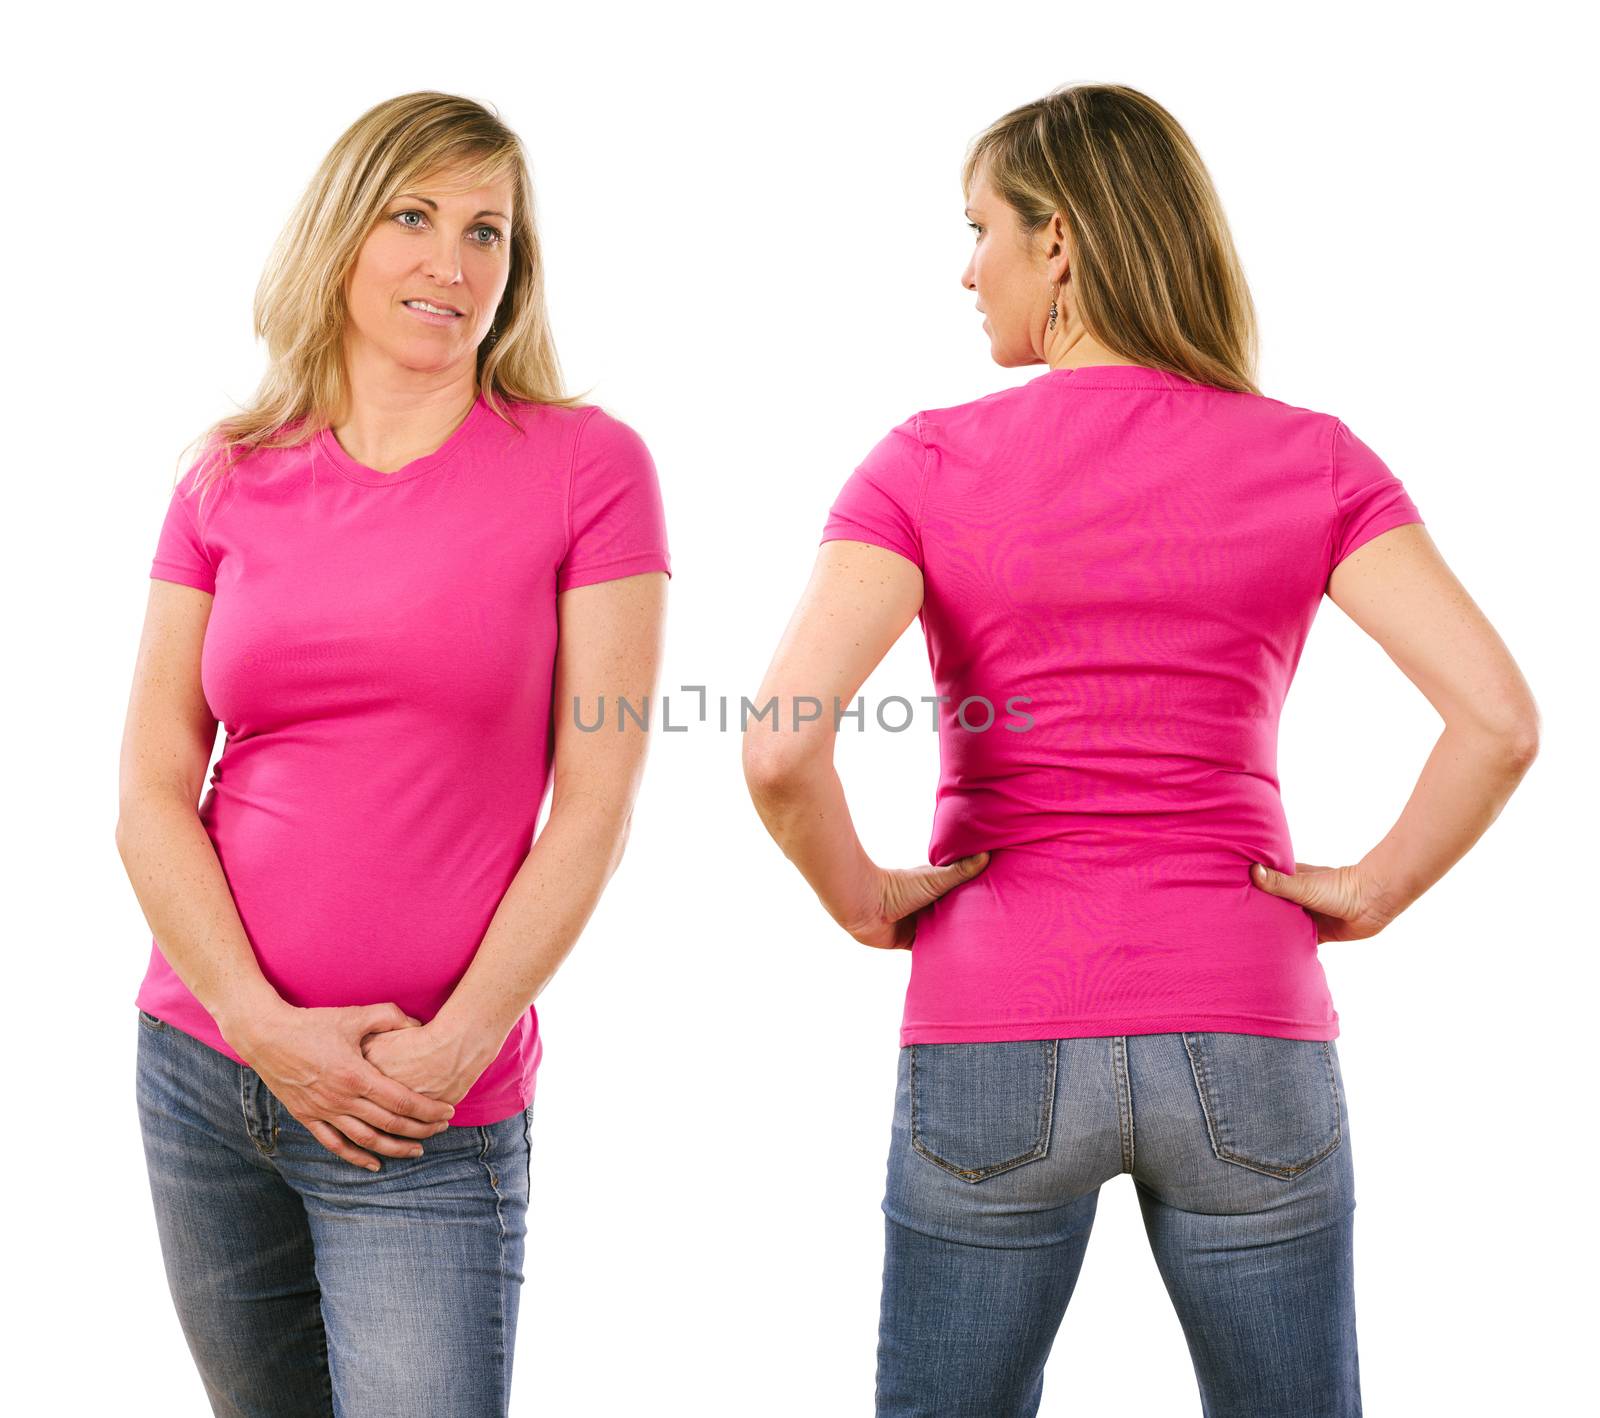 Photo of a beautiful blond woman in her early forties wearing a blank pink shirt. Ready for your design or artwork.